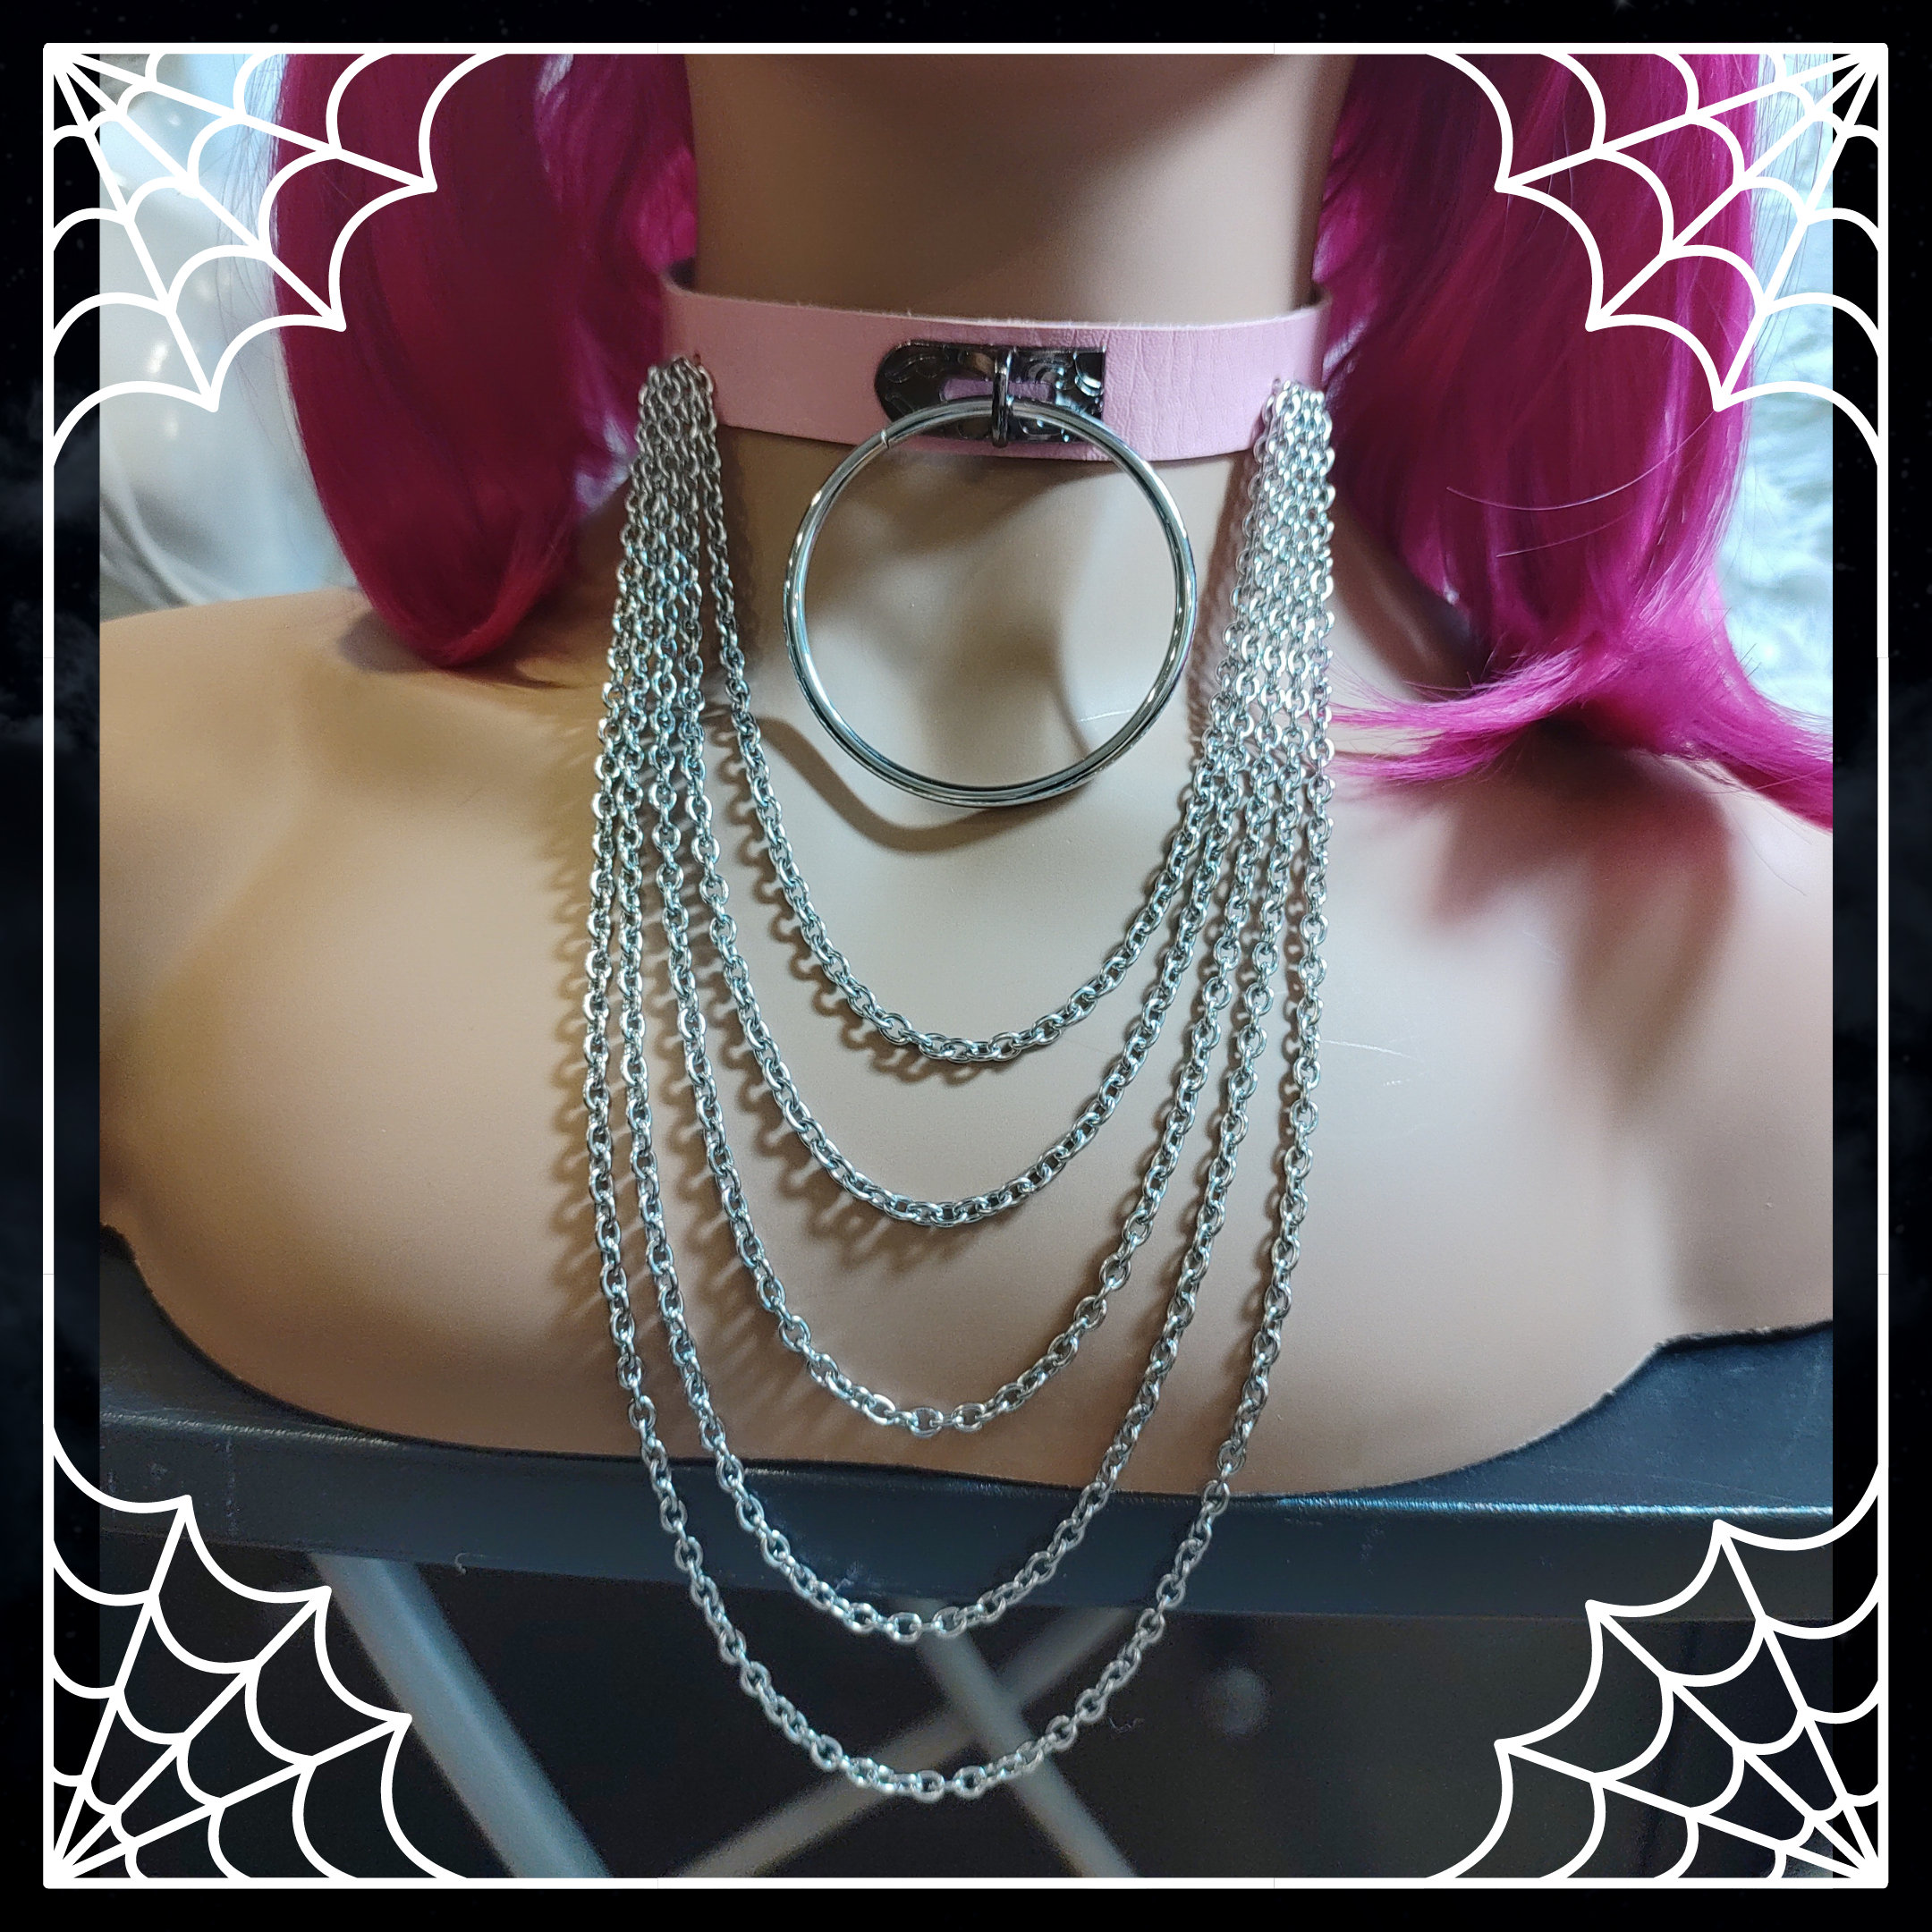 praktisk maternal stress Gothic choker / pastel goth / punk in pastel pink vegan leather with oring  and silver stainless steel chains. Witchy jewelry. Alt fashion.